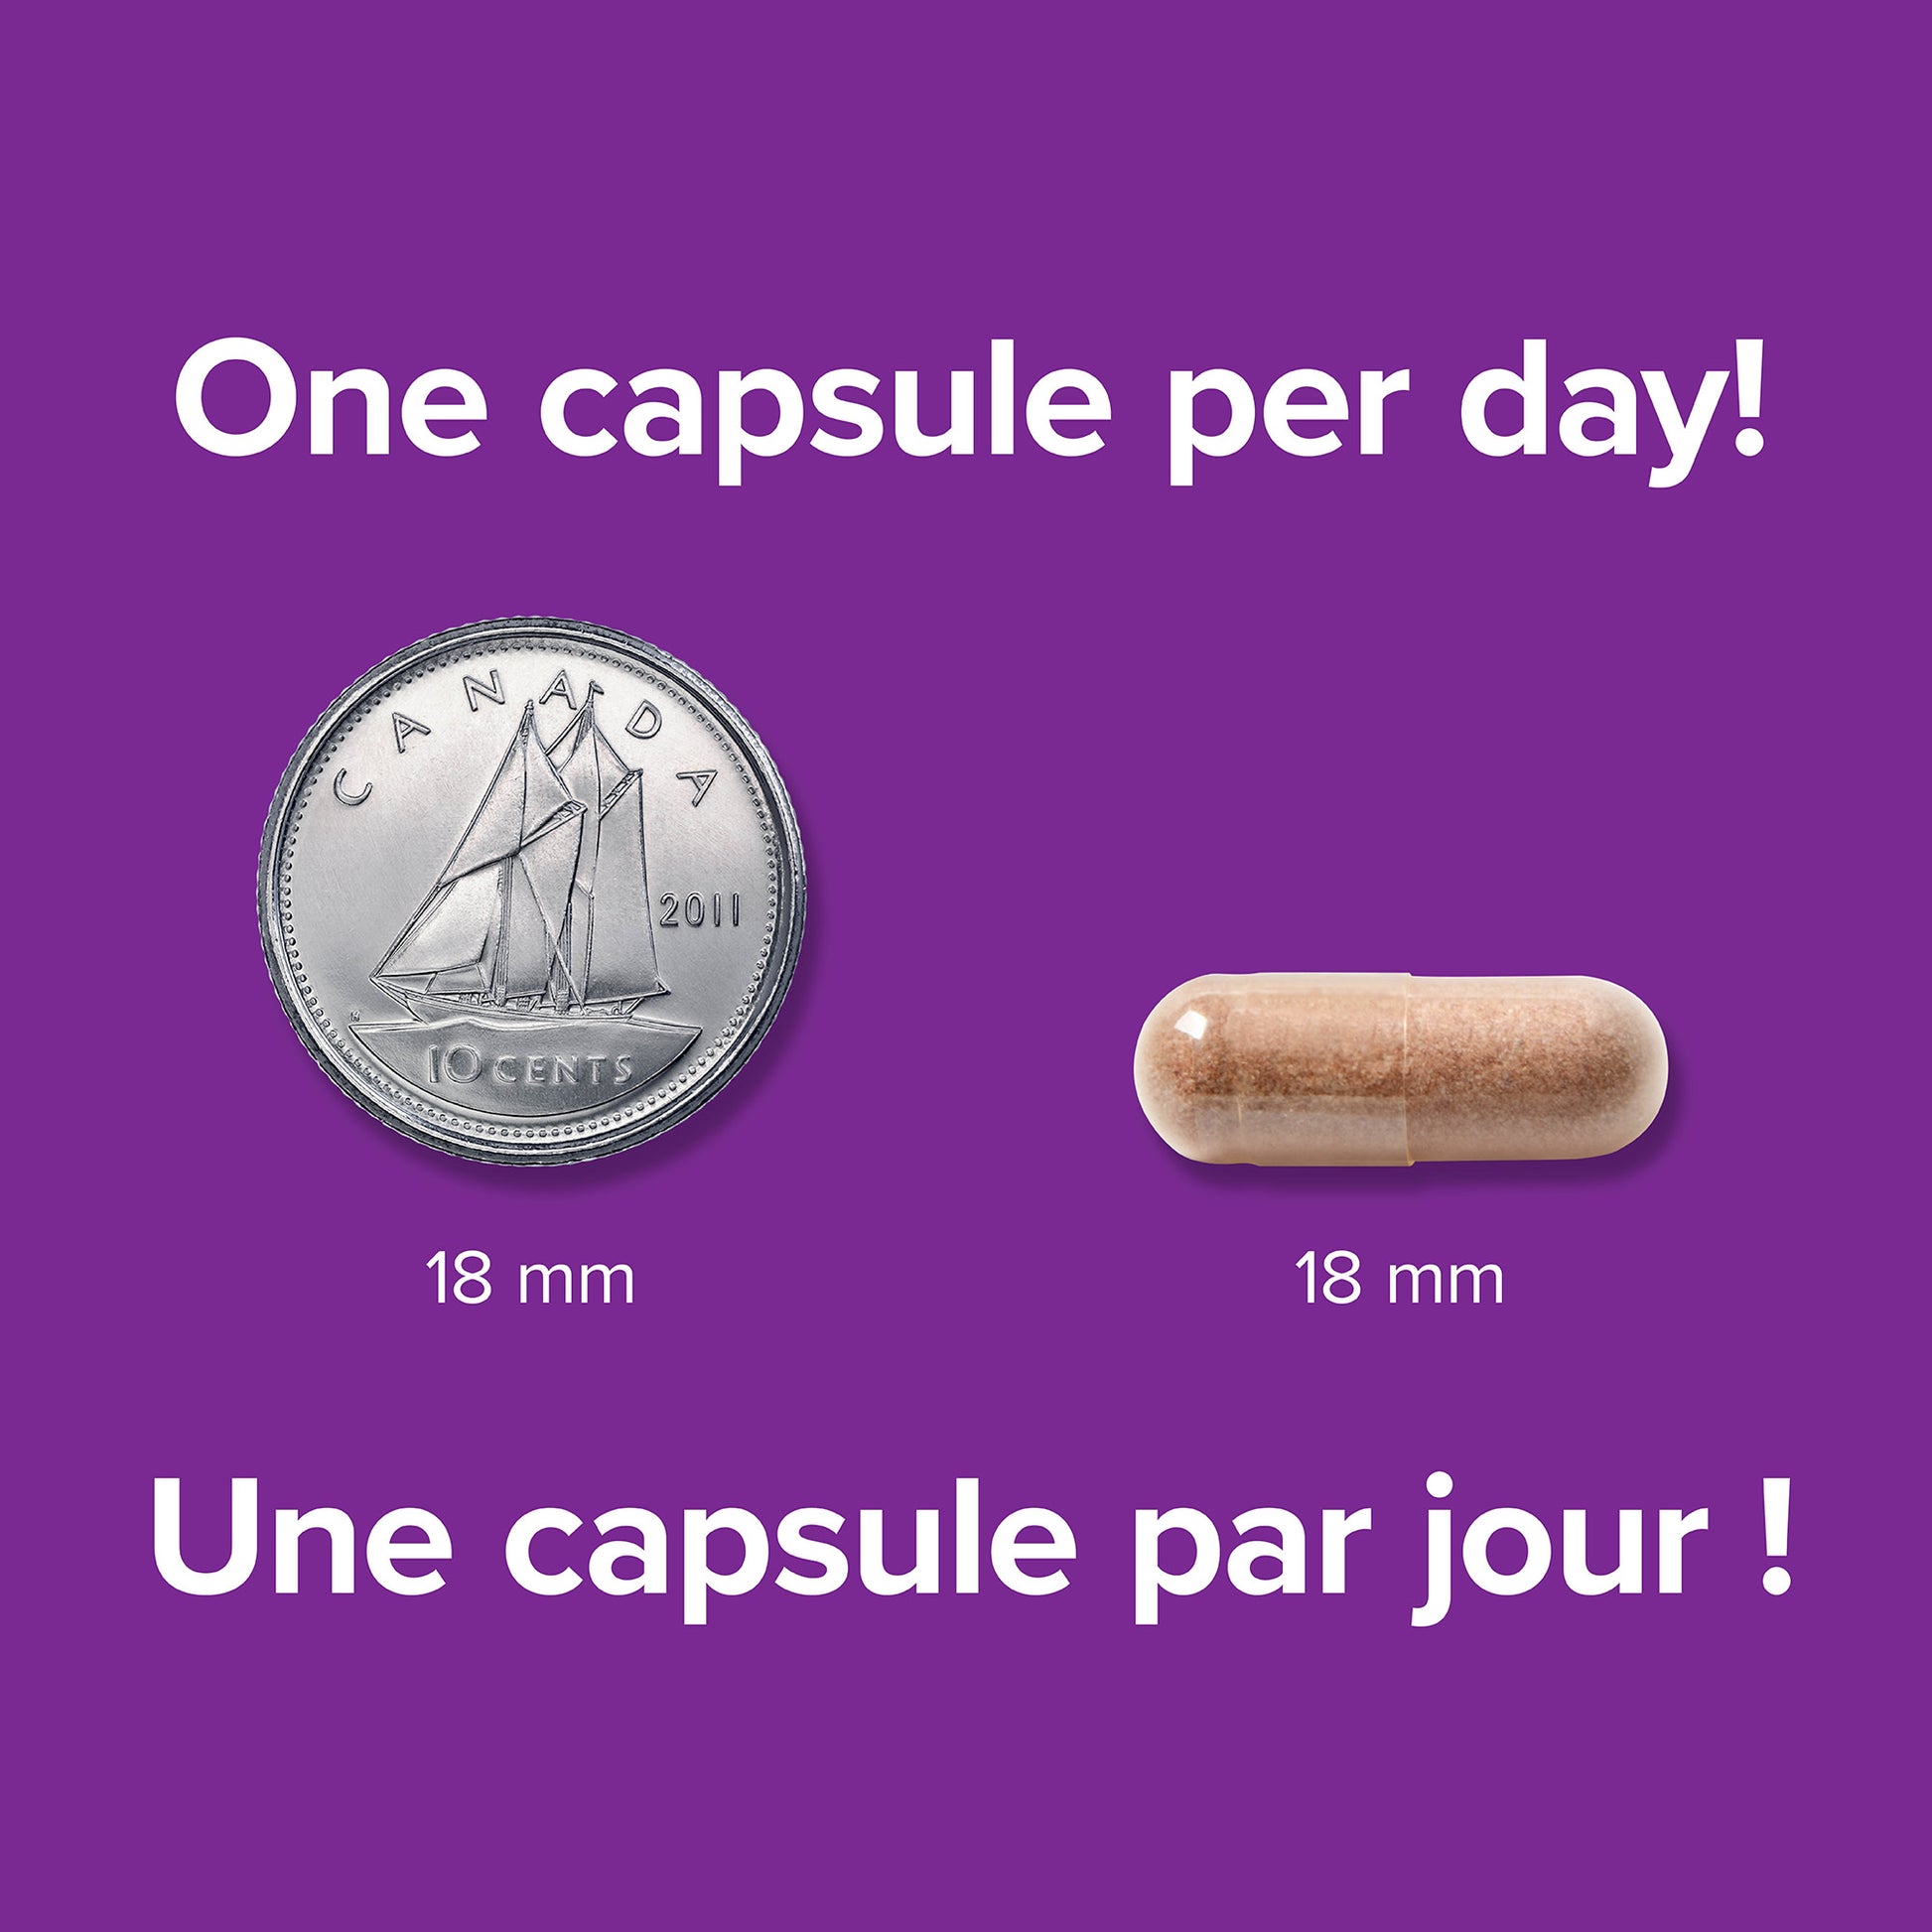 specifications-Cannelle 150 mg for Webber Naturals